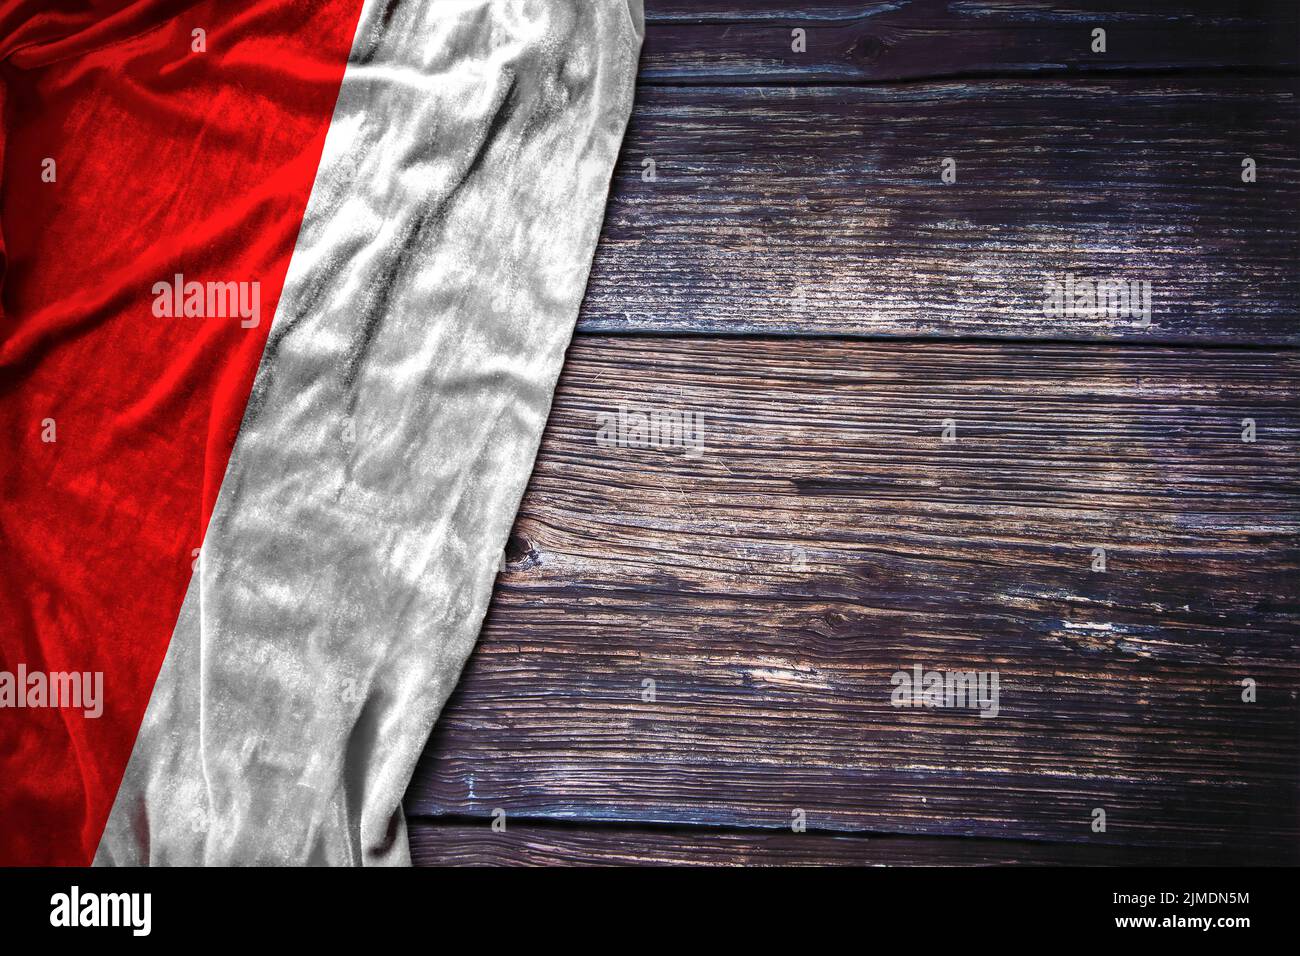 Indonesian flag on rustic wooden background for Indonesia National Day, Remembrance Day or Labor Day concept. Stock Photo